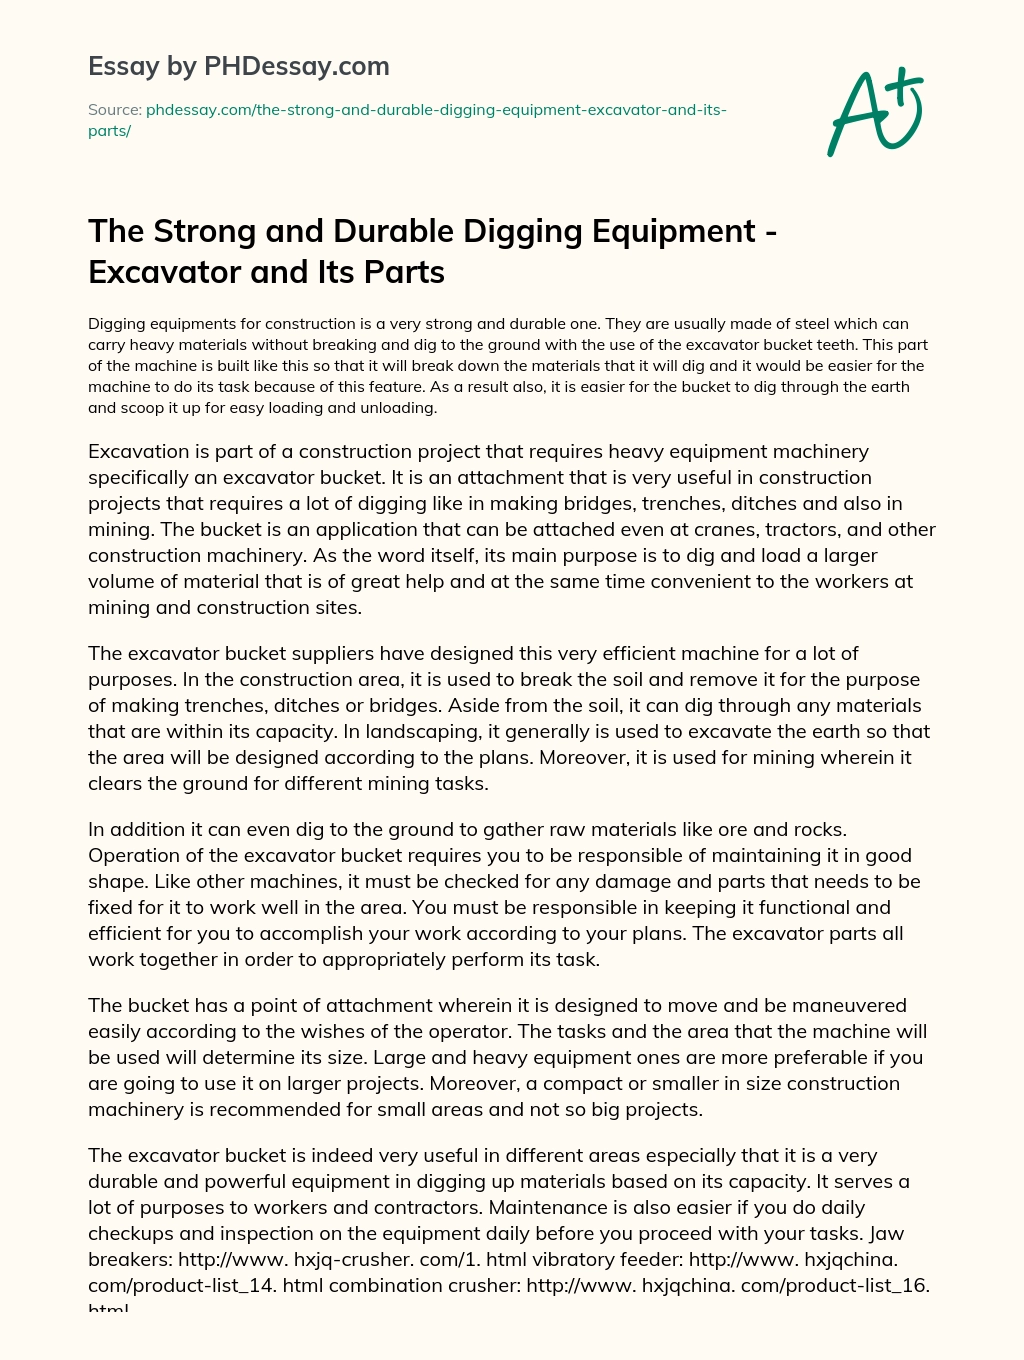 The Strong and Durable Digging Equipment – Excavator and Its Parts essay